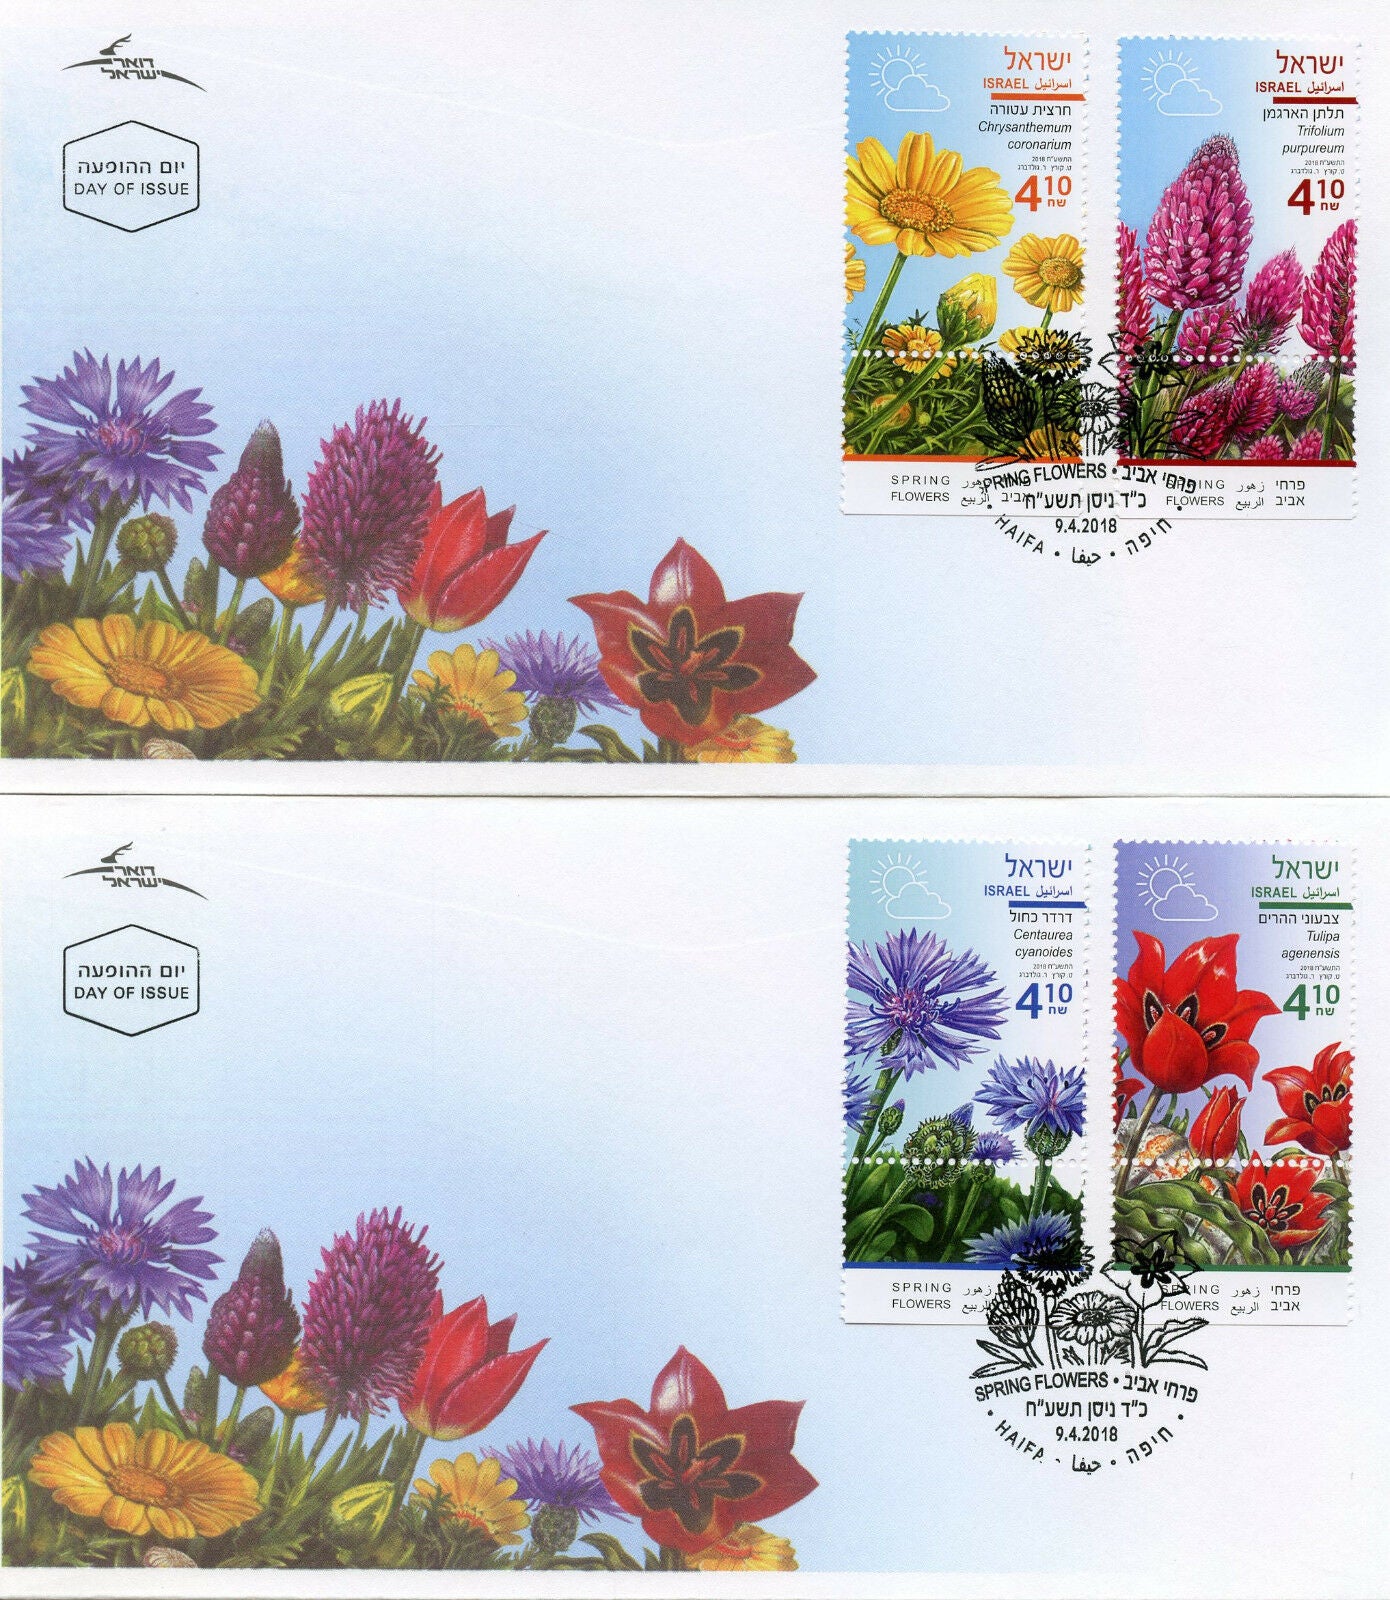 Israel 2018 FDC Spring Flowers Tulips Chrysanthemum 4v Set on 2 Covers Stamps